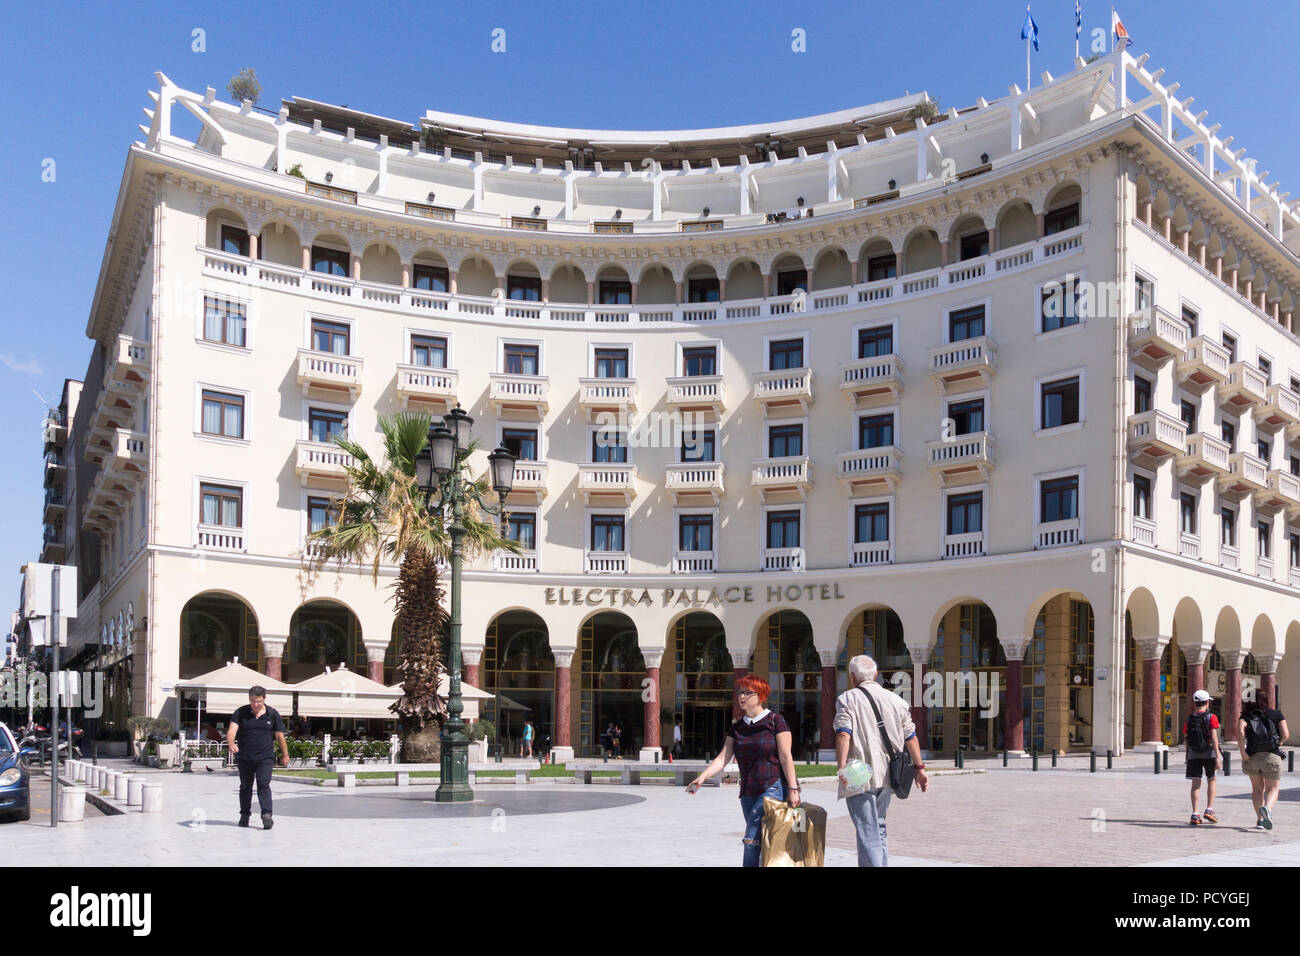 The Electra Palace Hotel - a well known landmark on Aristotelous square with classical and byzantine elements in Thessaloniki city centre, Greece Stock Photo